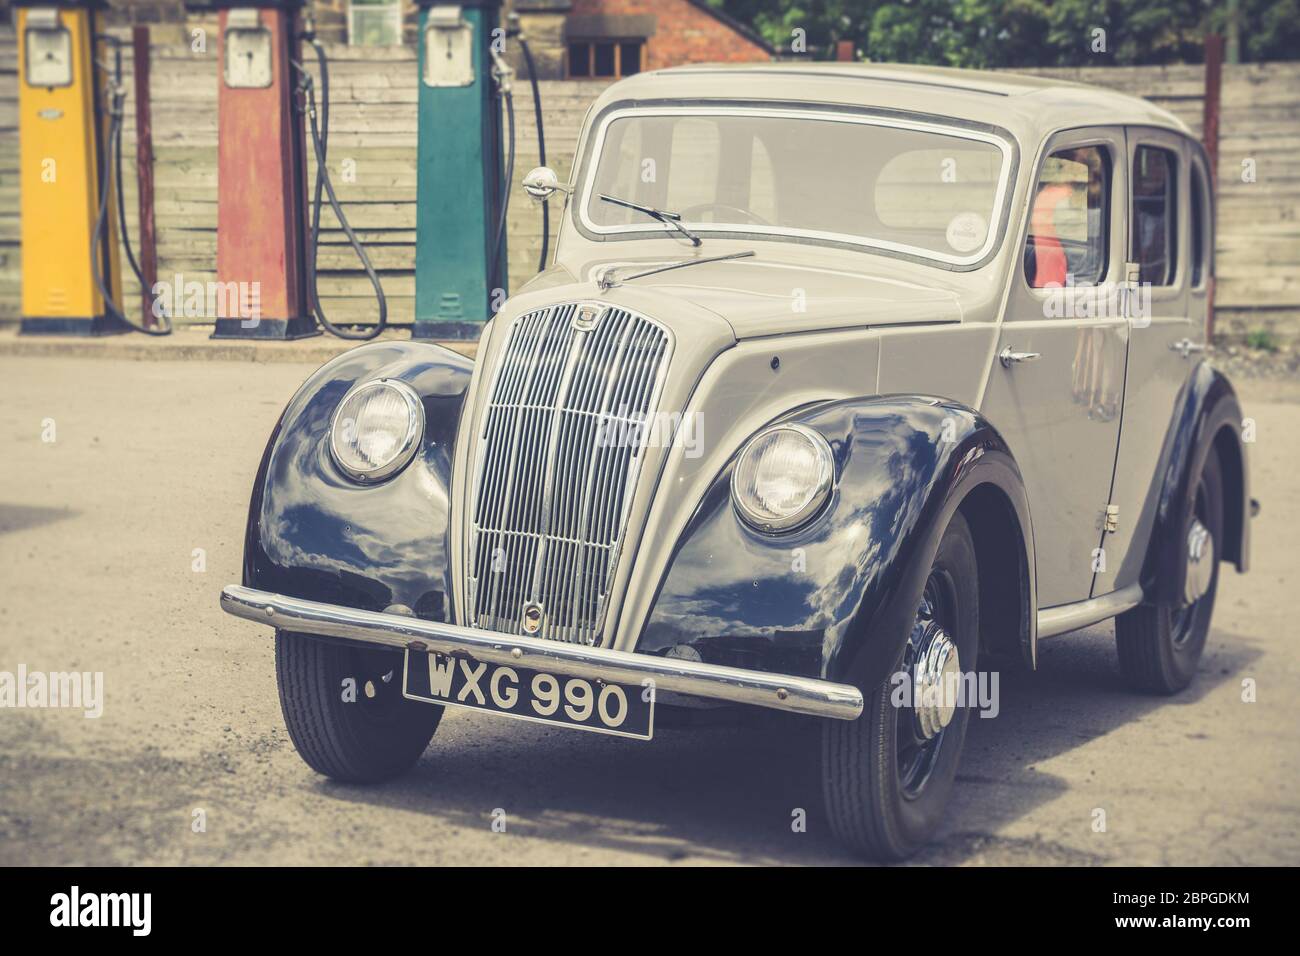 Retro, front view close up of classic vintage Morris 8 motor car parked outside vintage garage, UK. Stock Photo